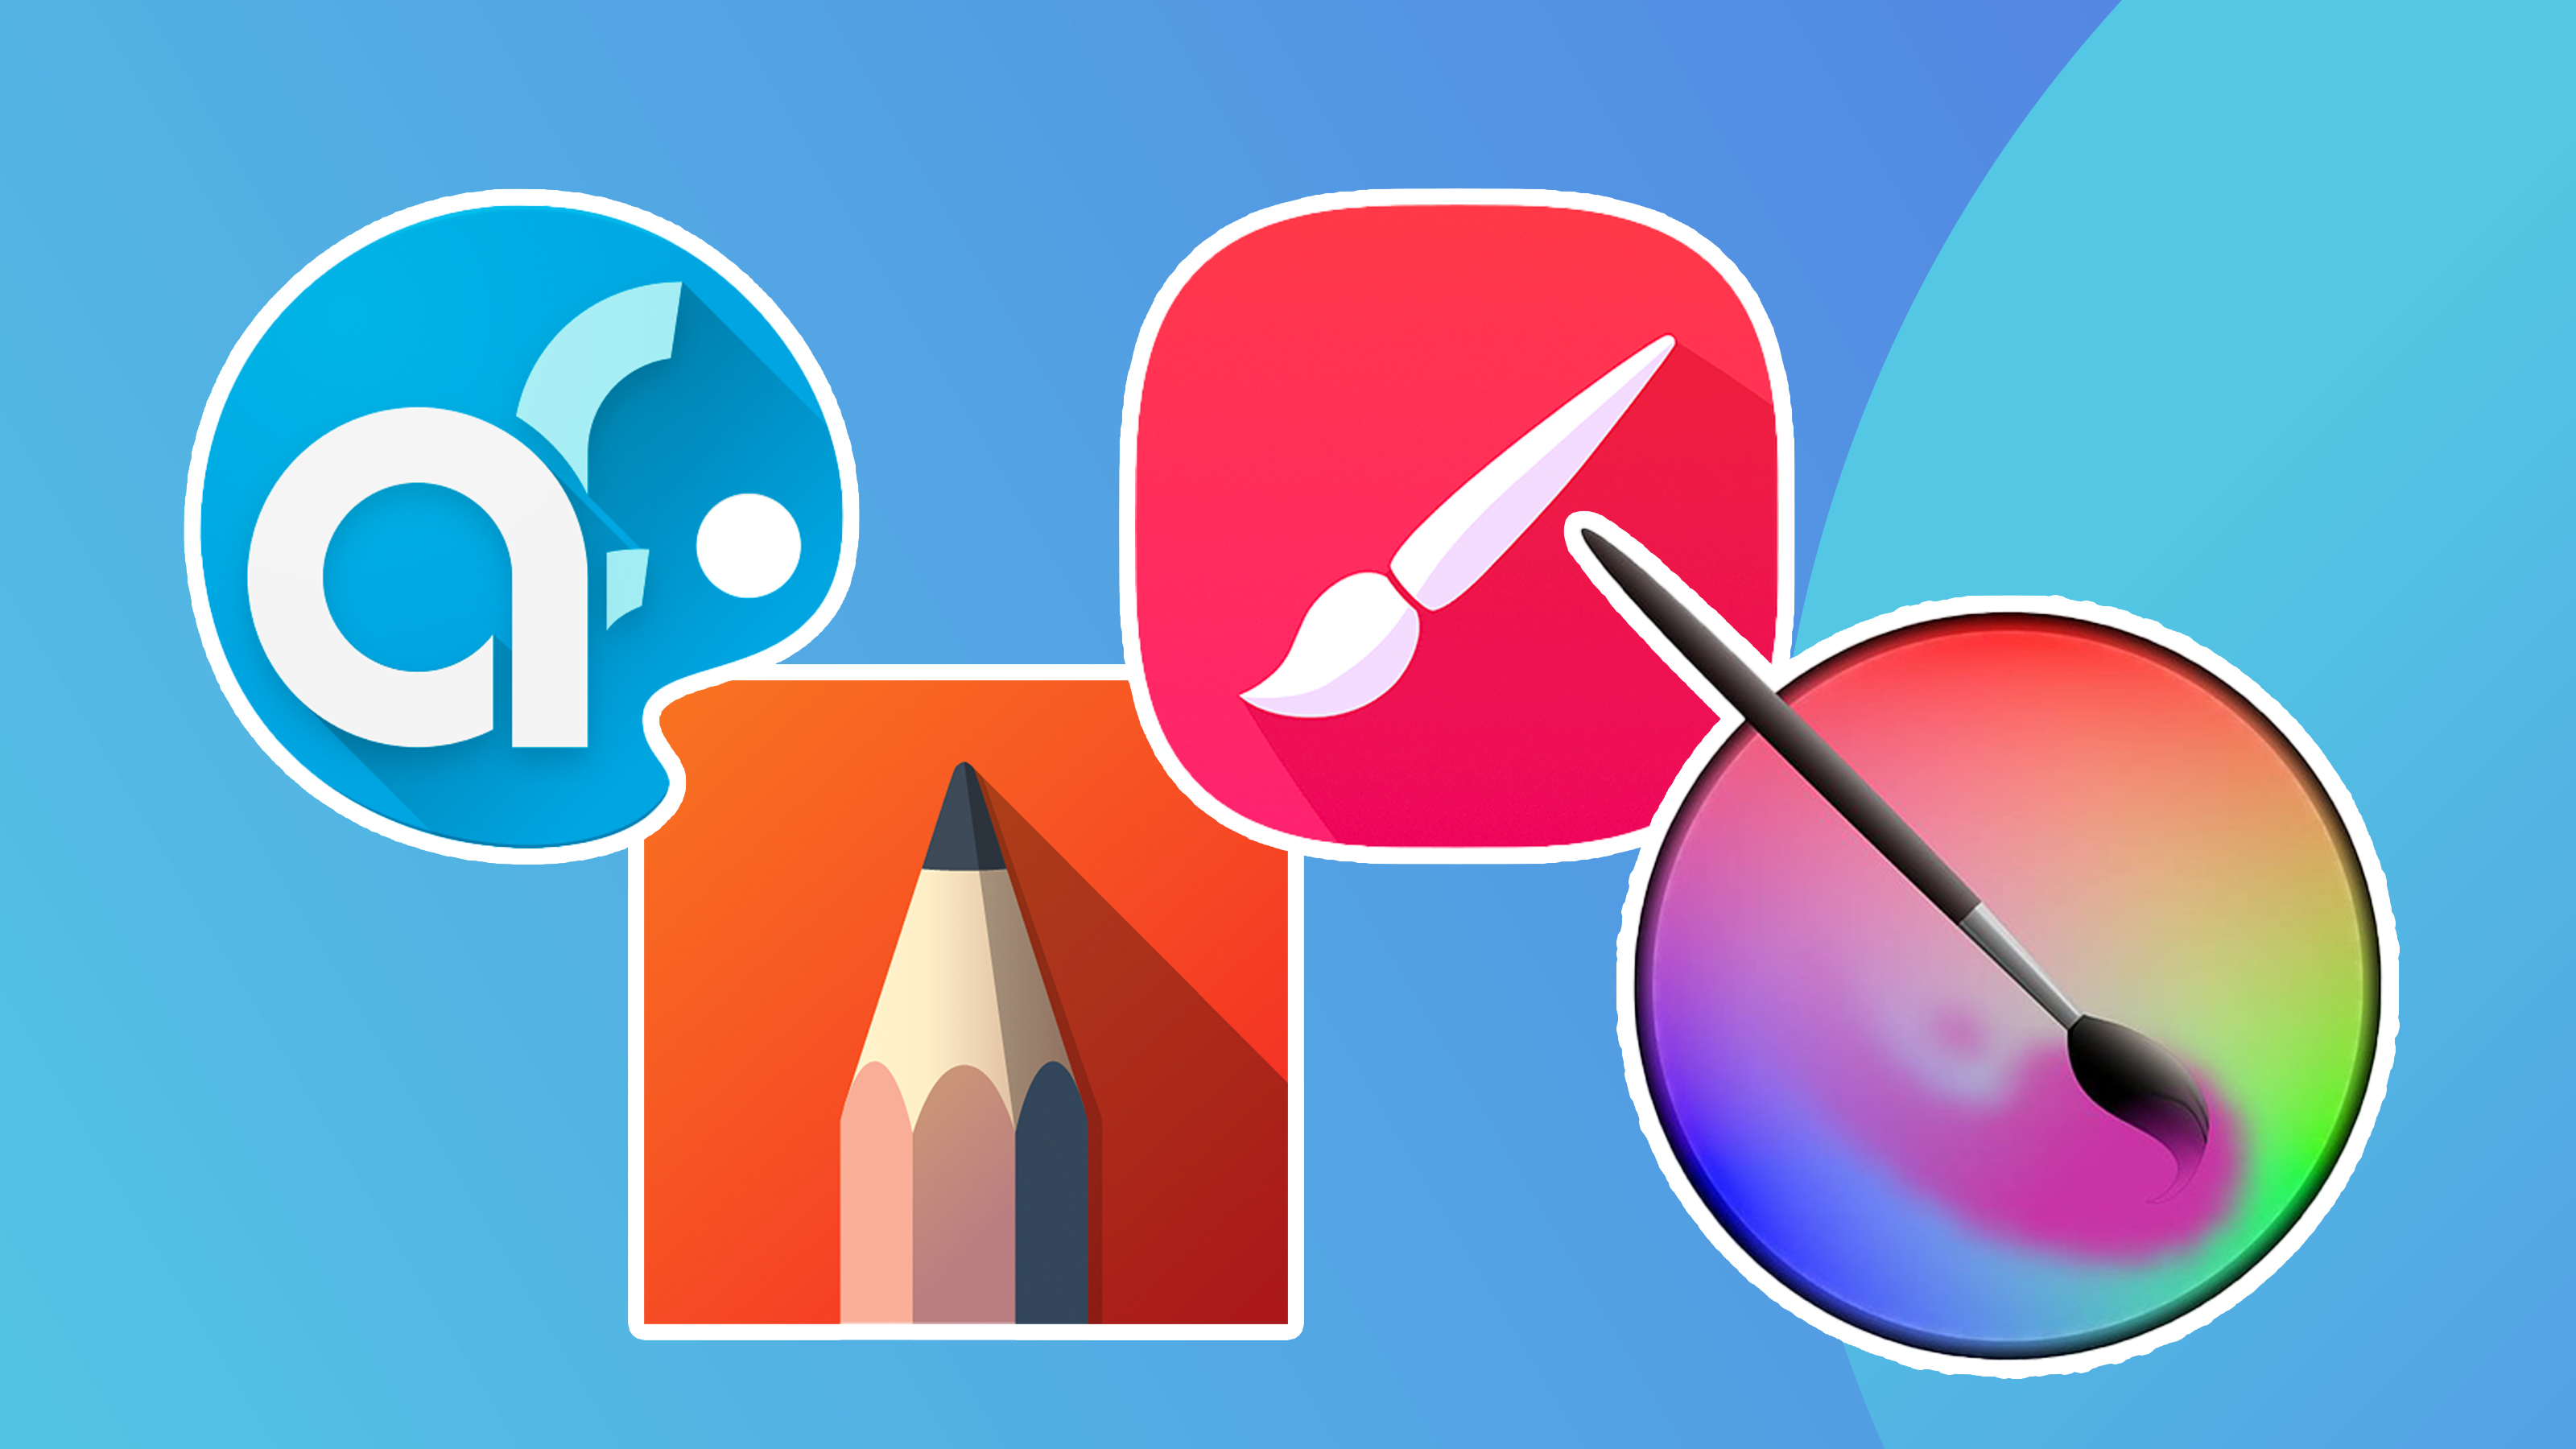 Best Drawing Apps and Software in 2023 (Free & Paid) | | Art Rocket